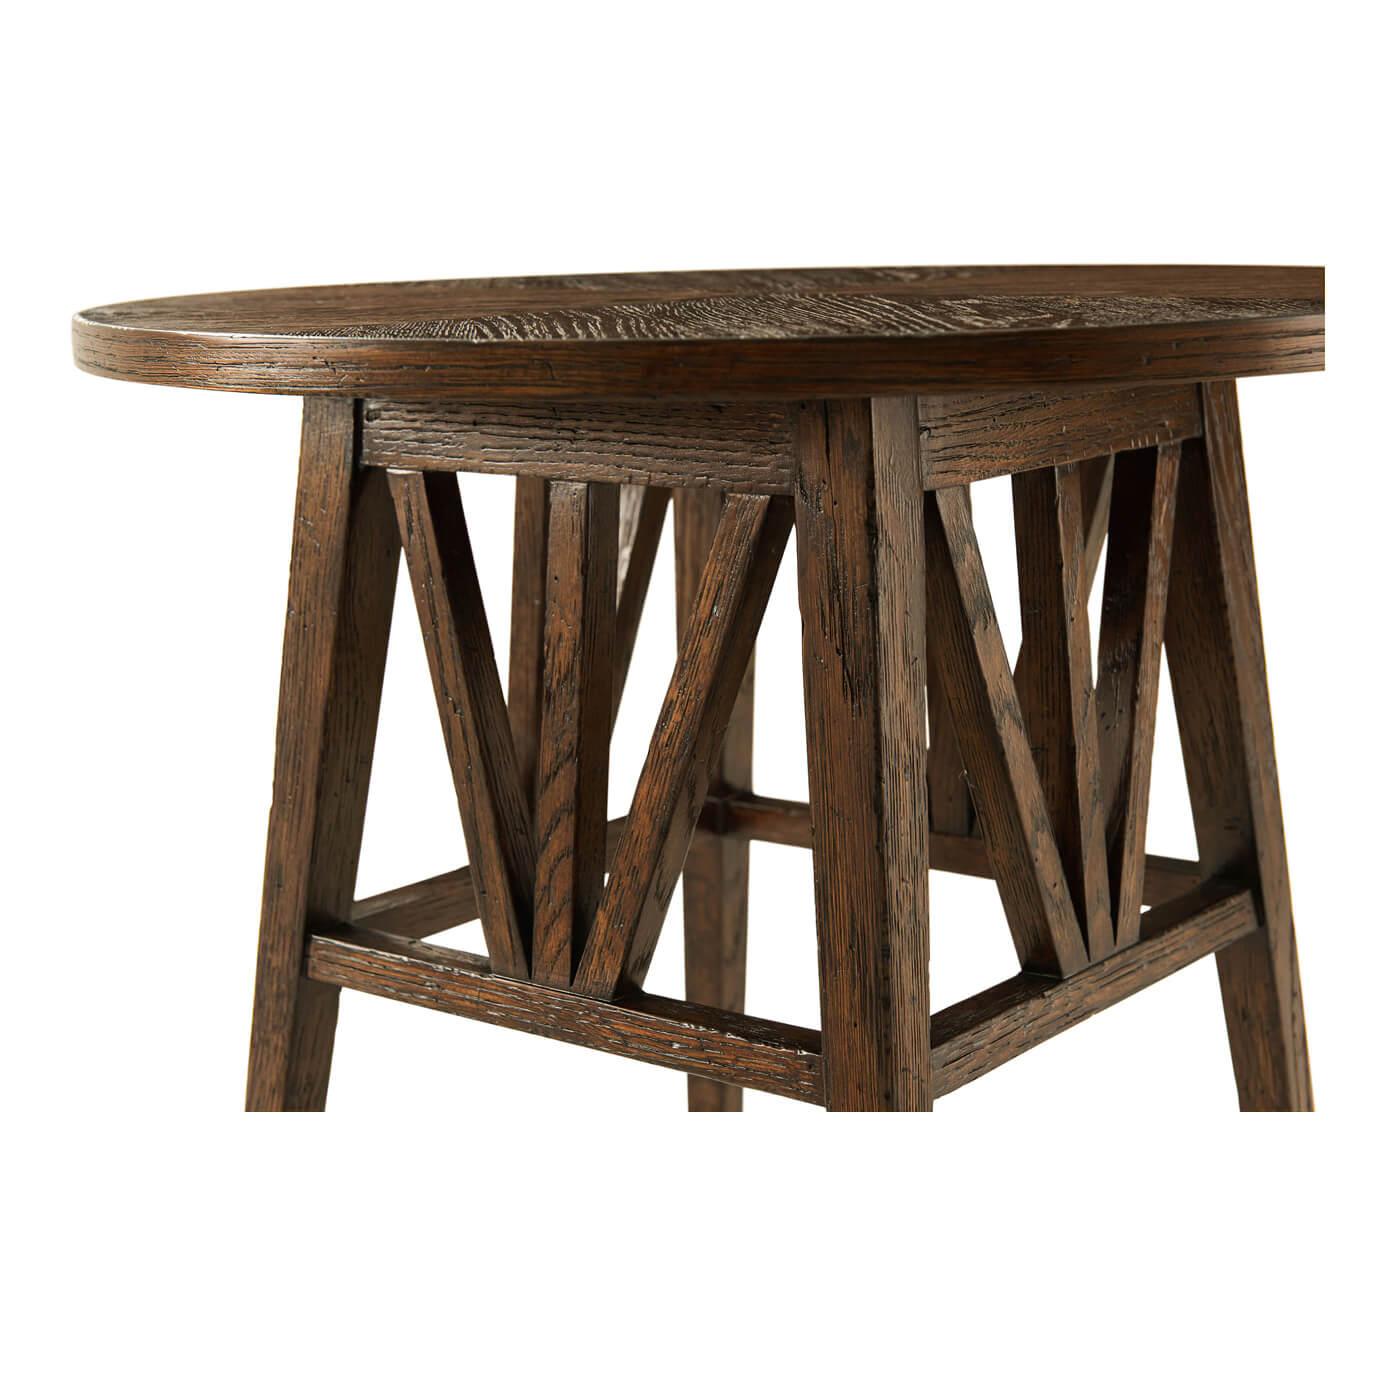 Vietnamese Modern Rustic Oak Round End Table For Sale